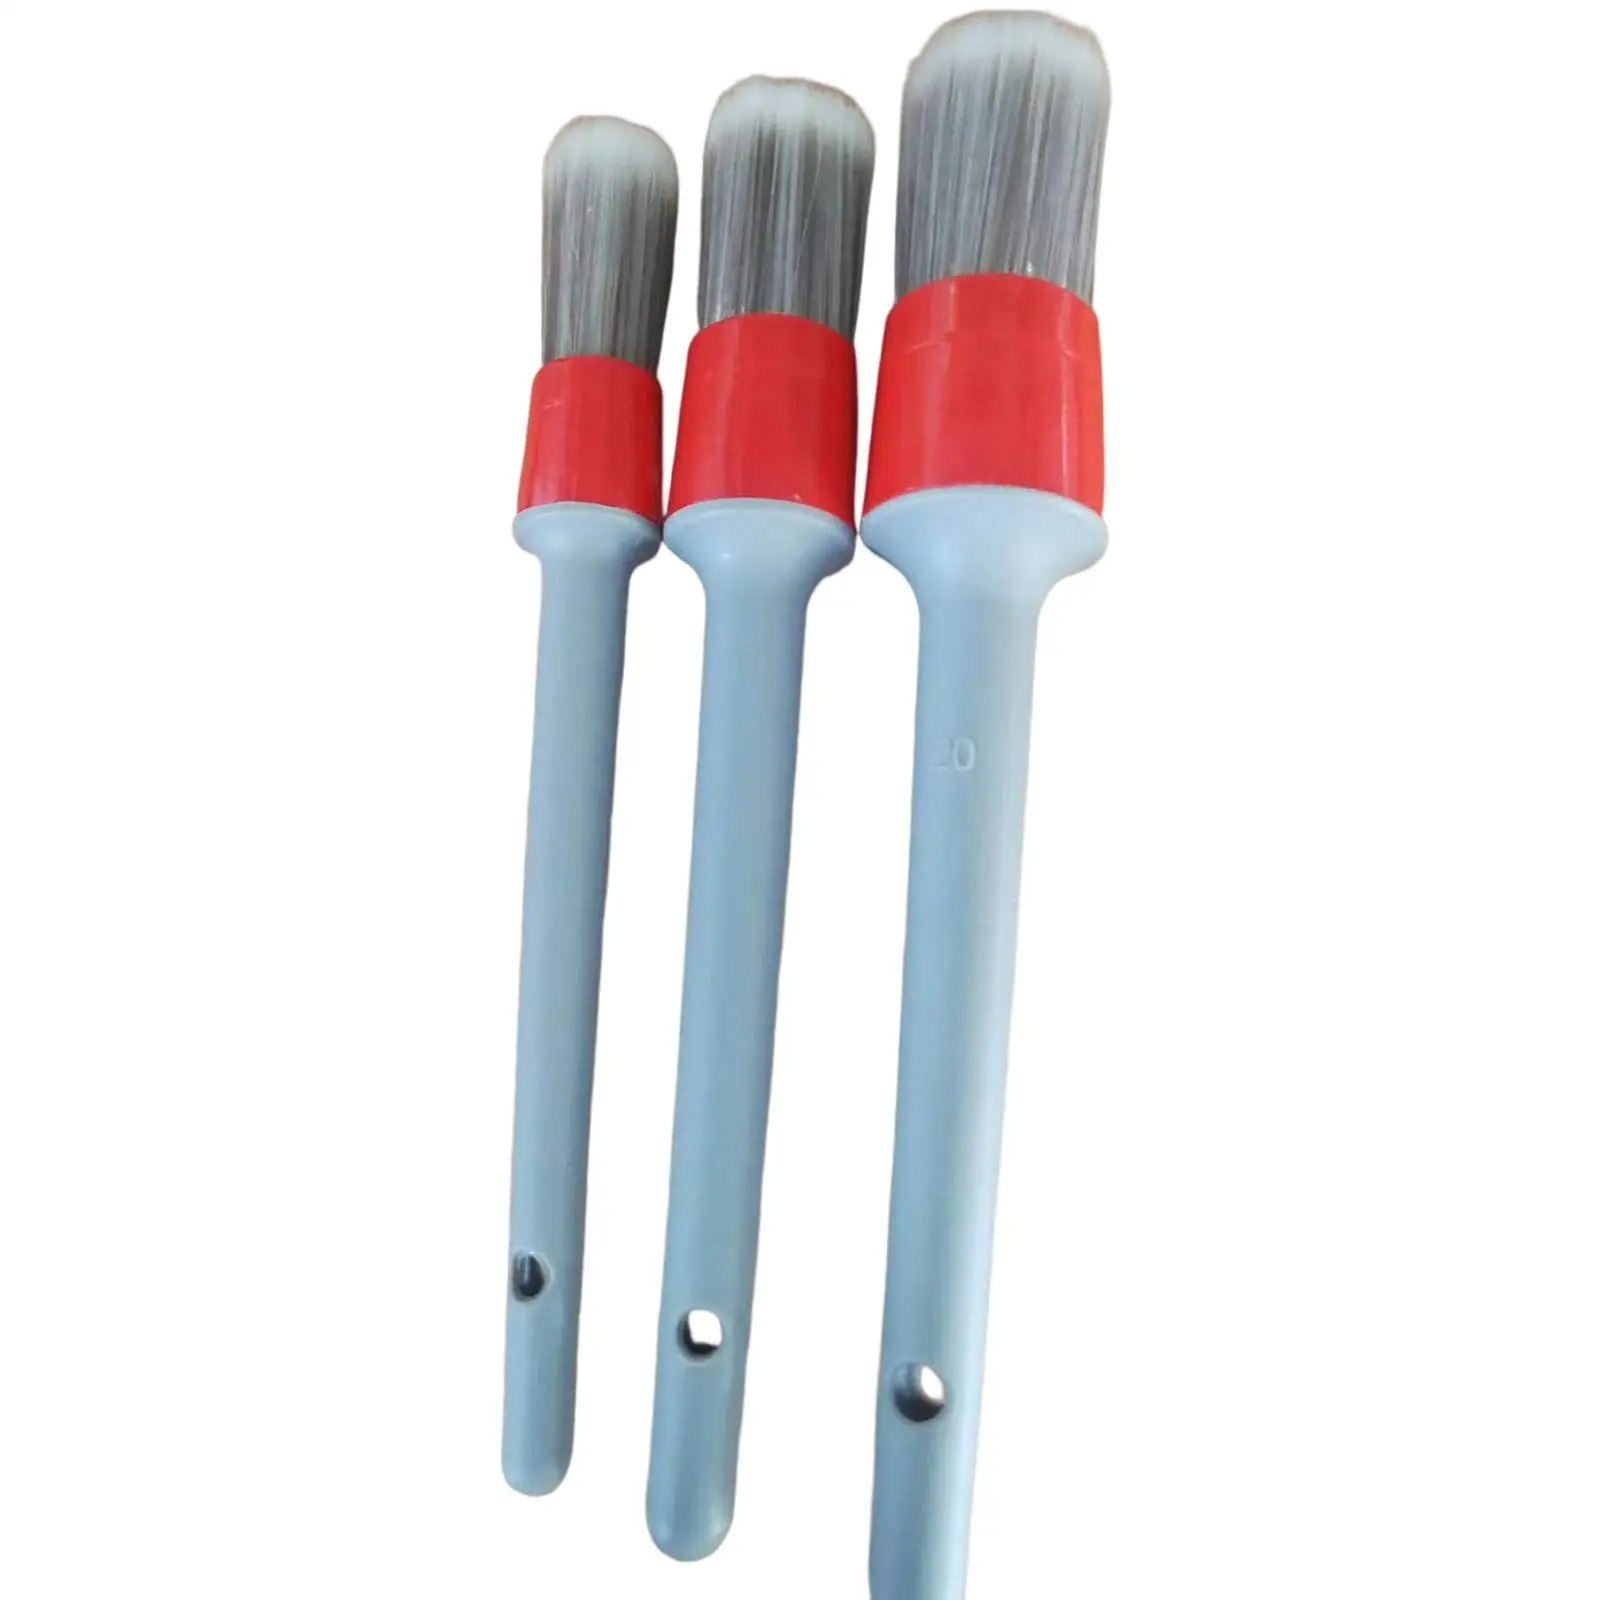 Car Detailing Brushes Set Automotive Detail Brushes for Cleaning Interior Washing Exterior Wheel Cup Holder Tire